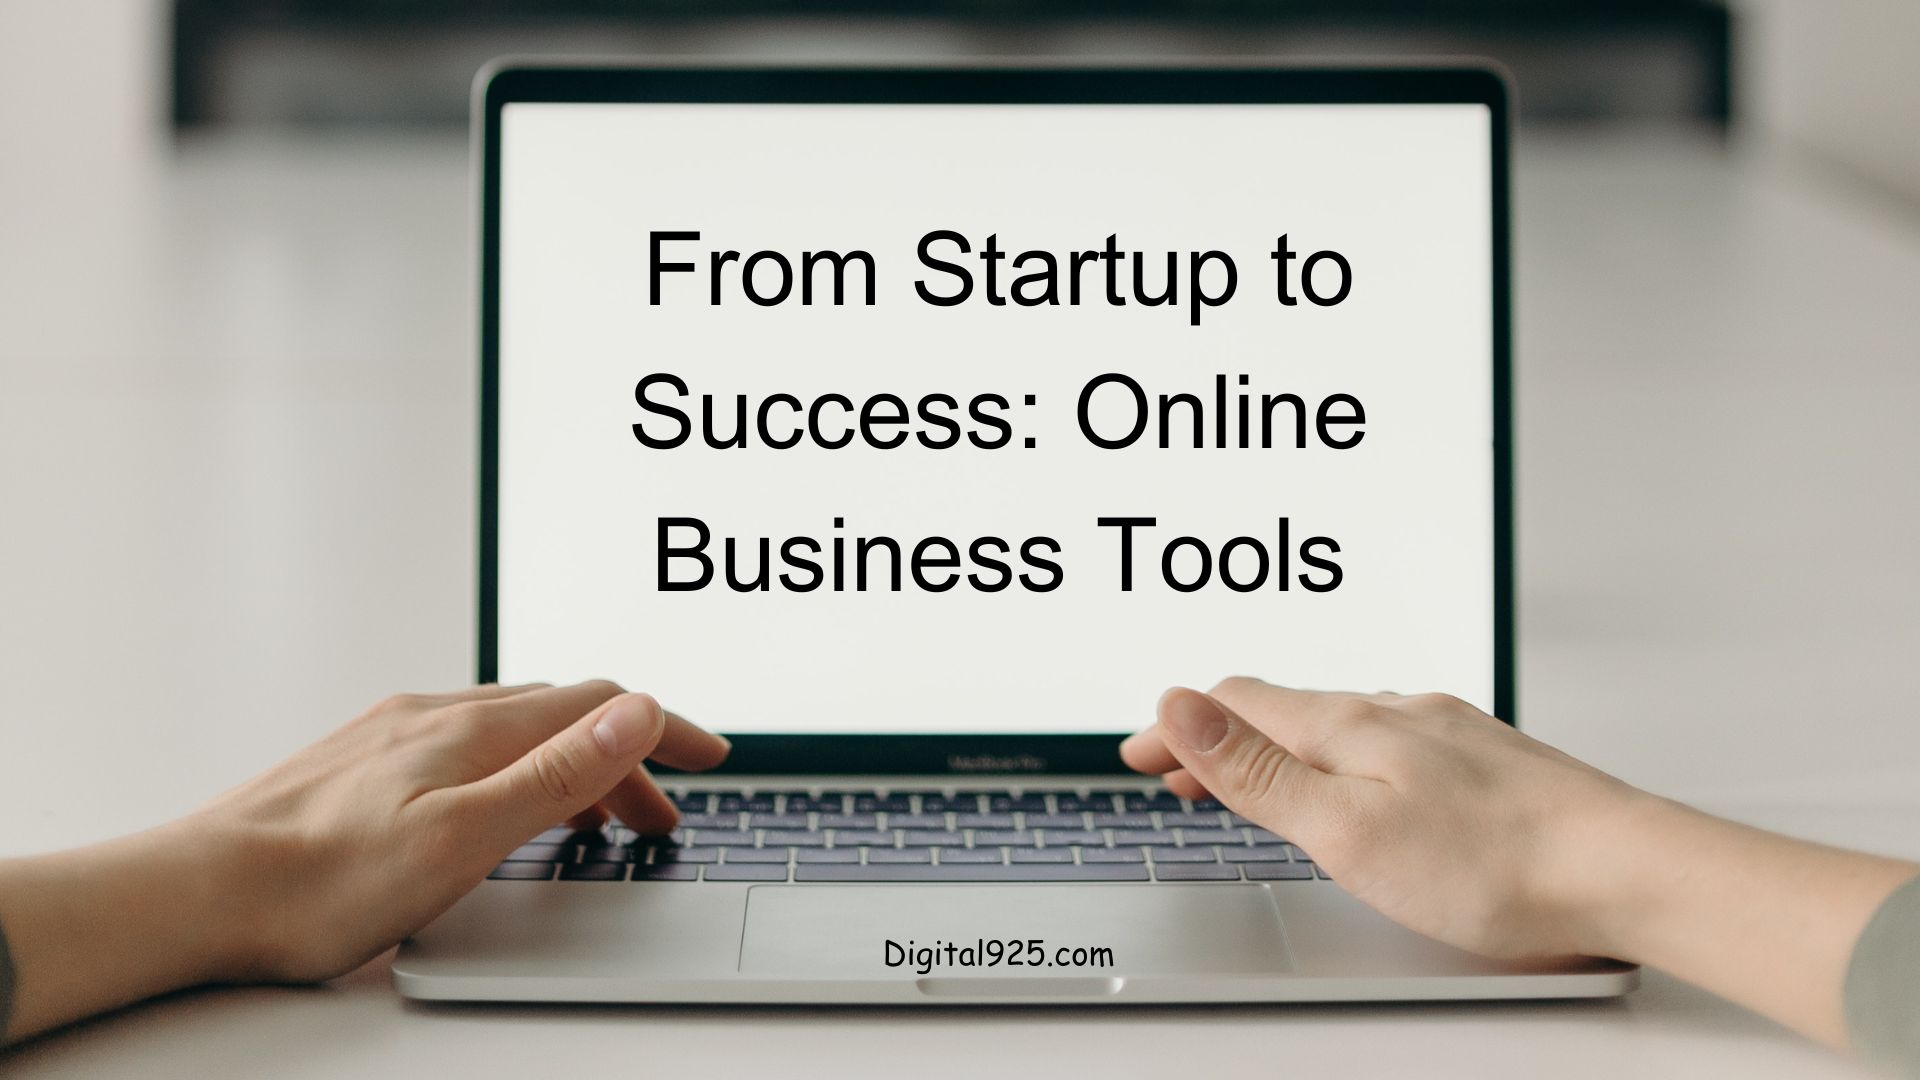 From Startup to Success: Online Business Tools